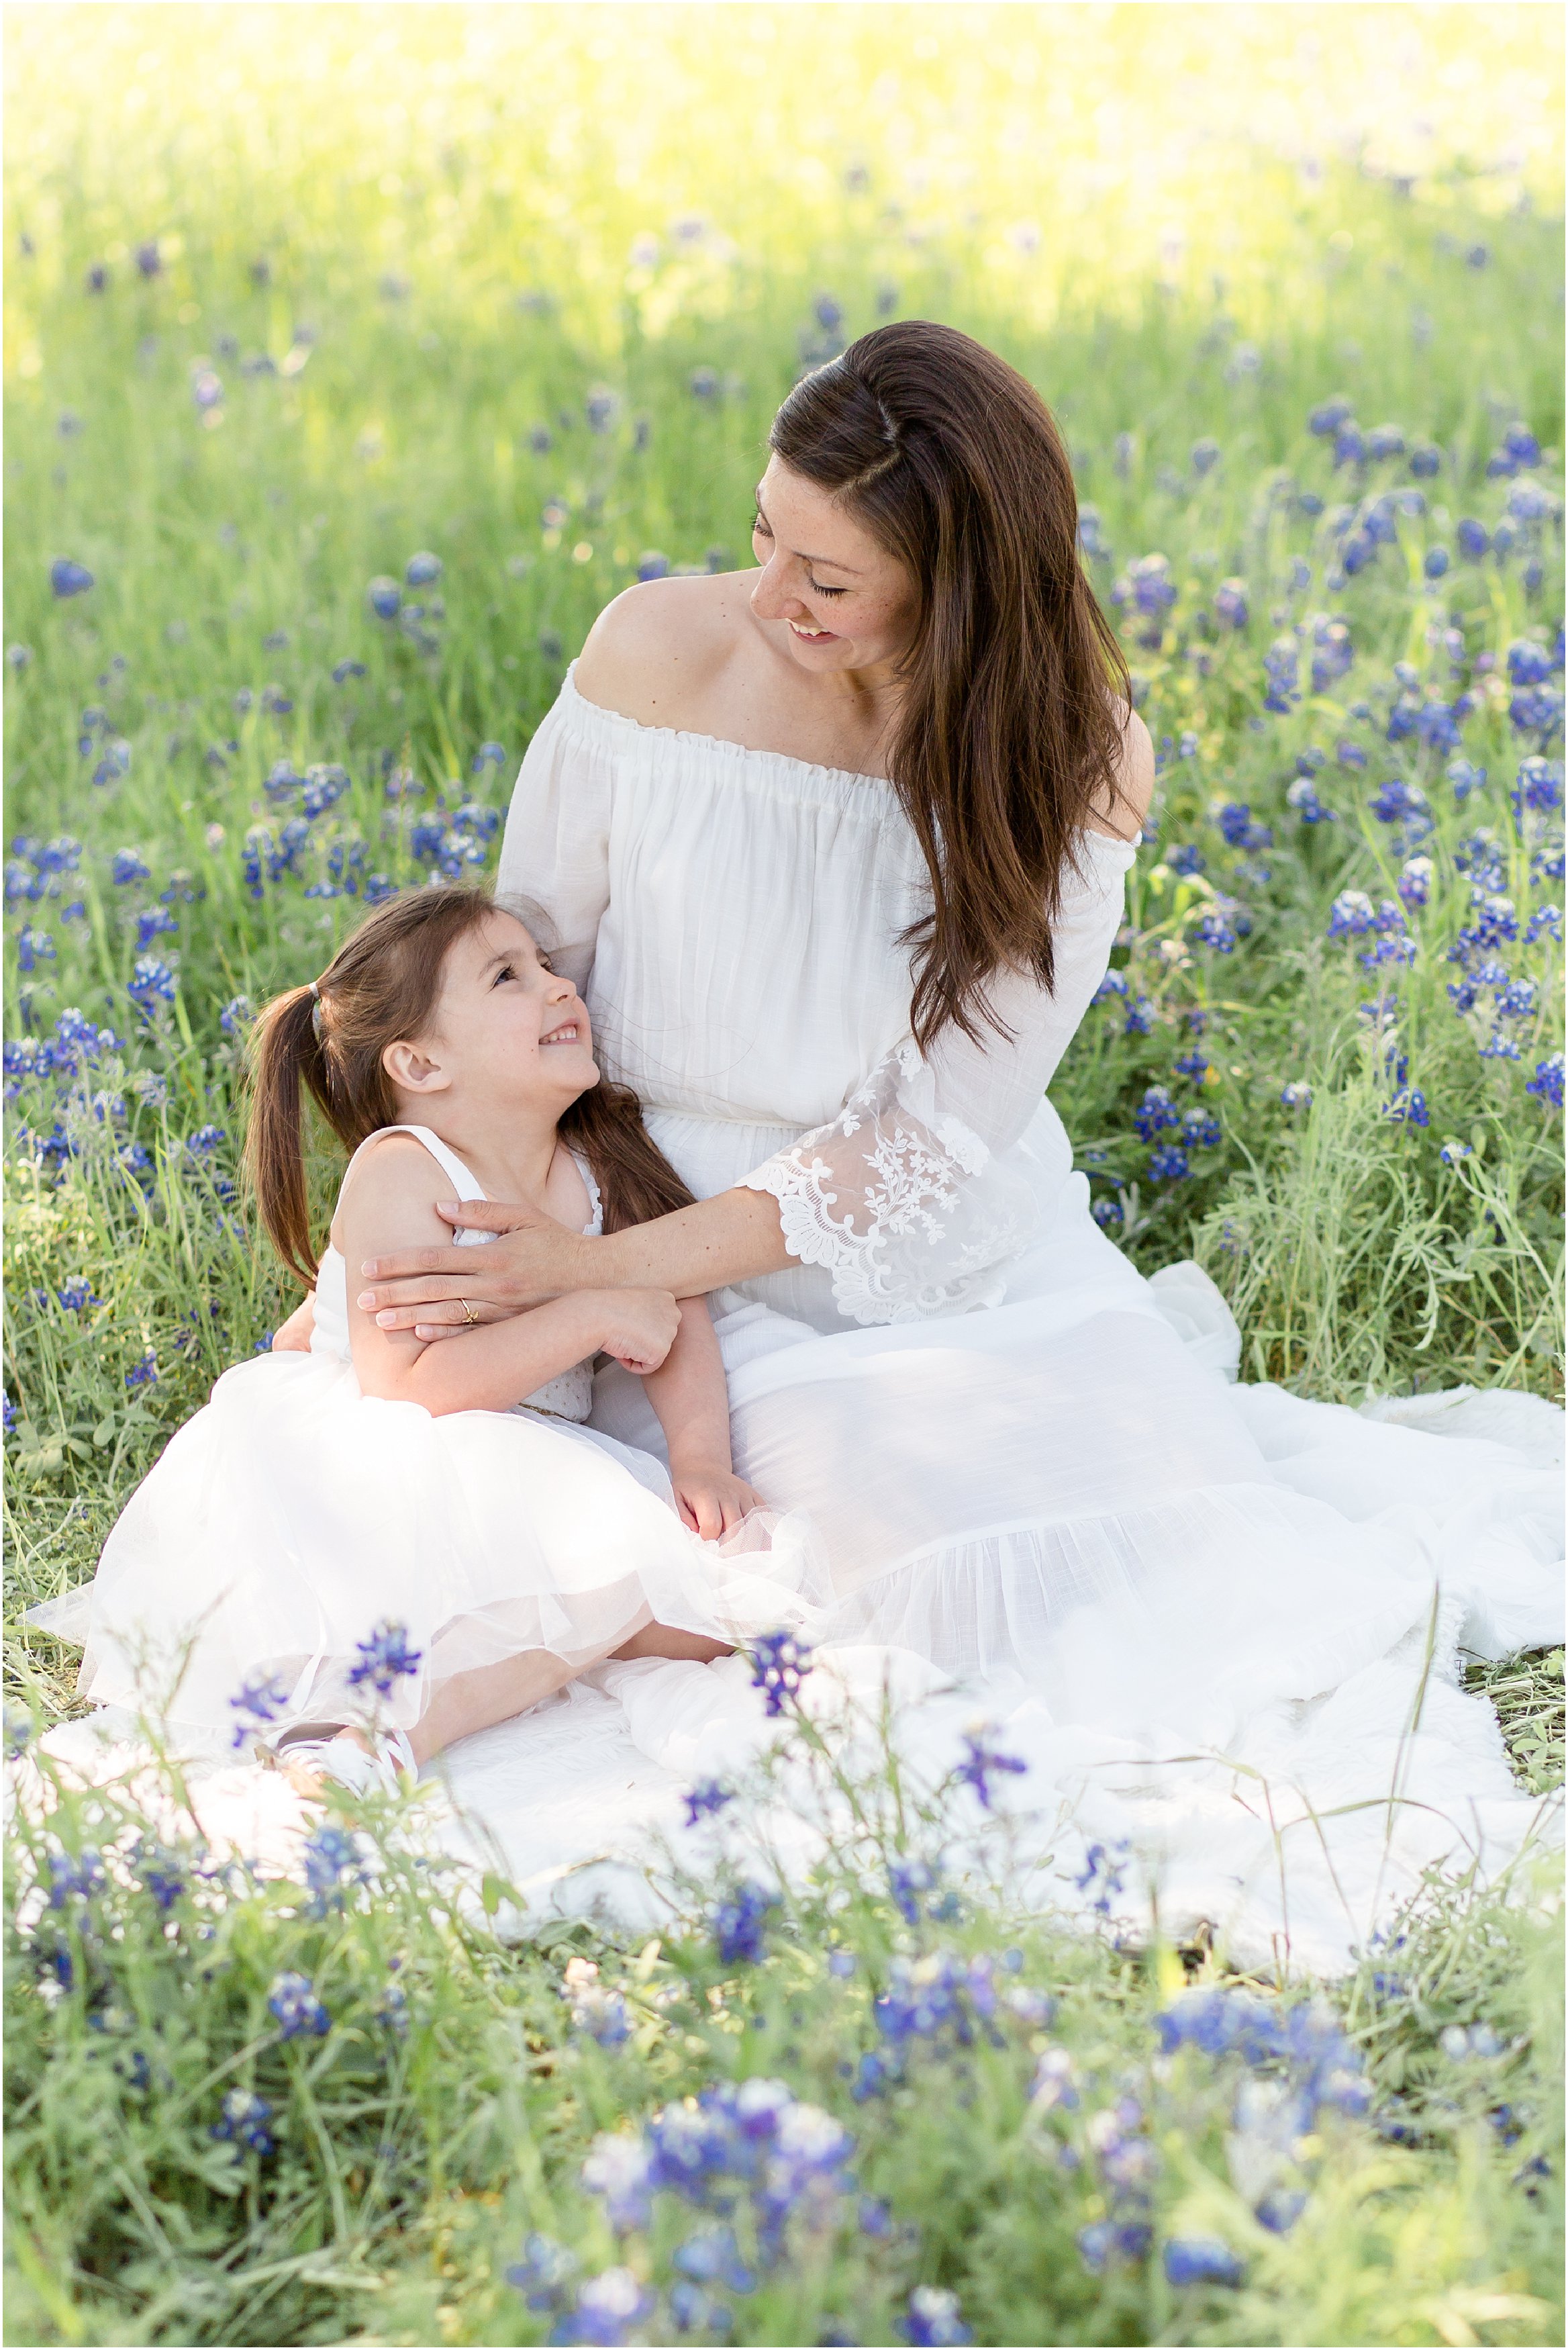 mom and daughter in white dresses in bluebonnet field